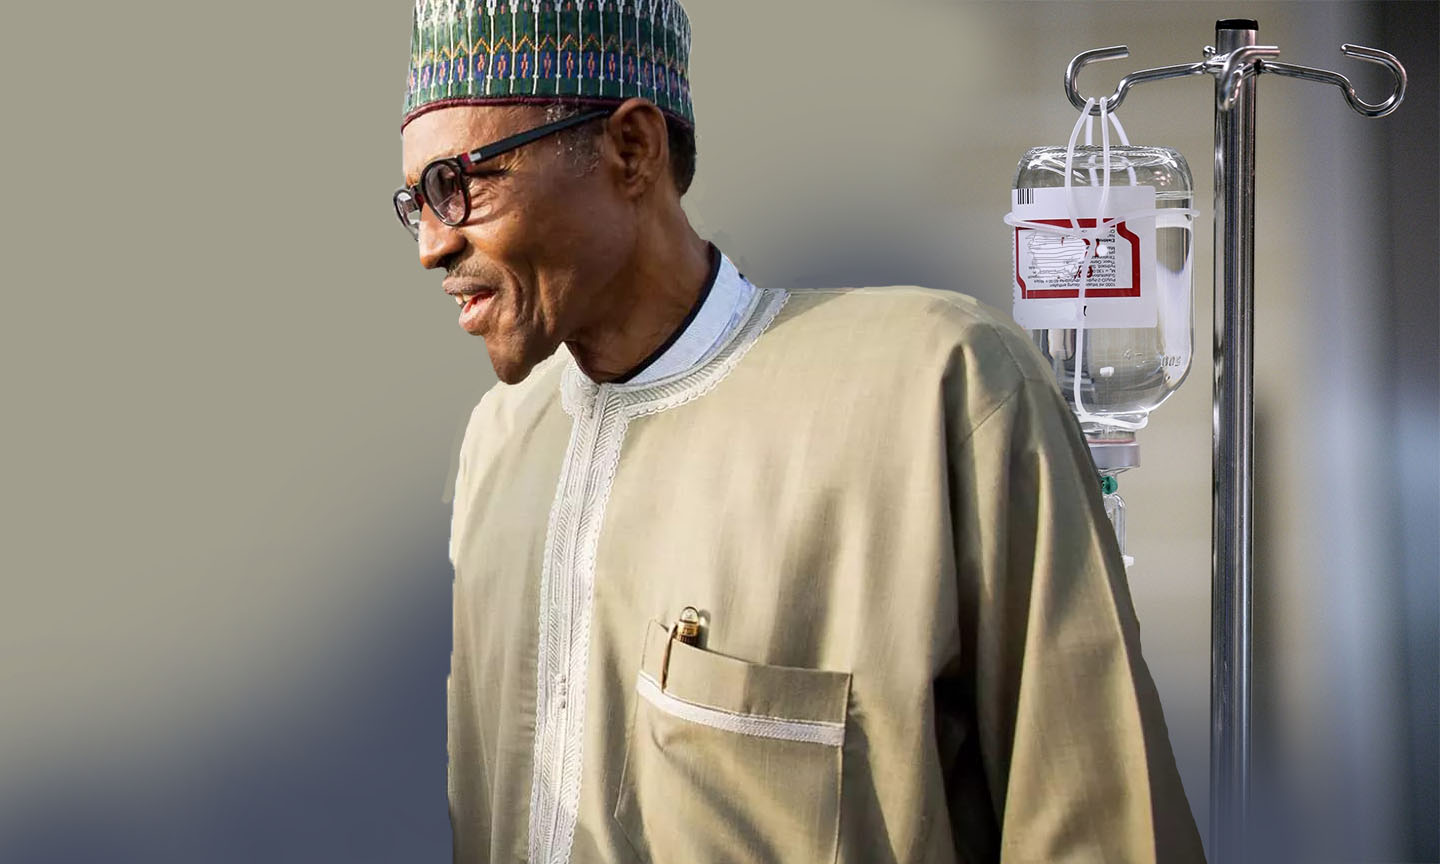 The presidency said Buhari went to see an ear, nose, and throat specialist in the British capital as a precautionary measure, but critics countered that such conditions should not have required an oversea treatment. Buhari was initially expected back in Nigeria on Thursday, but fresh concern about his health woes prompted a delayed return. 